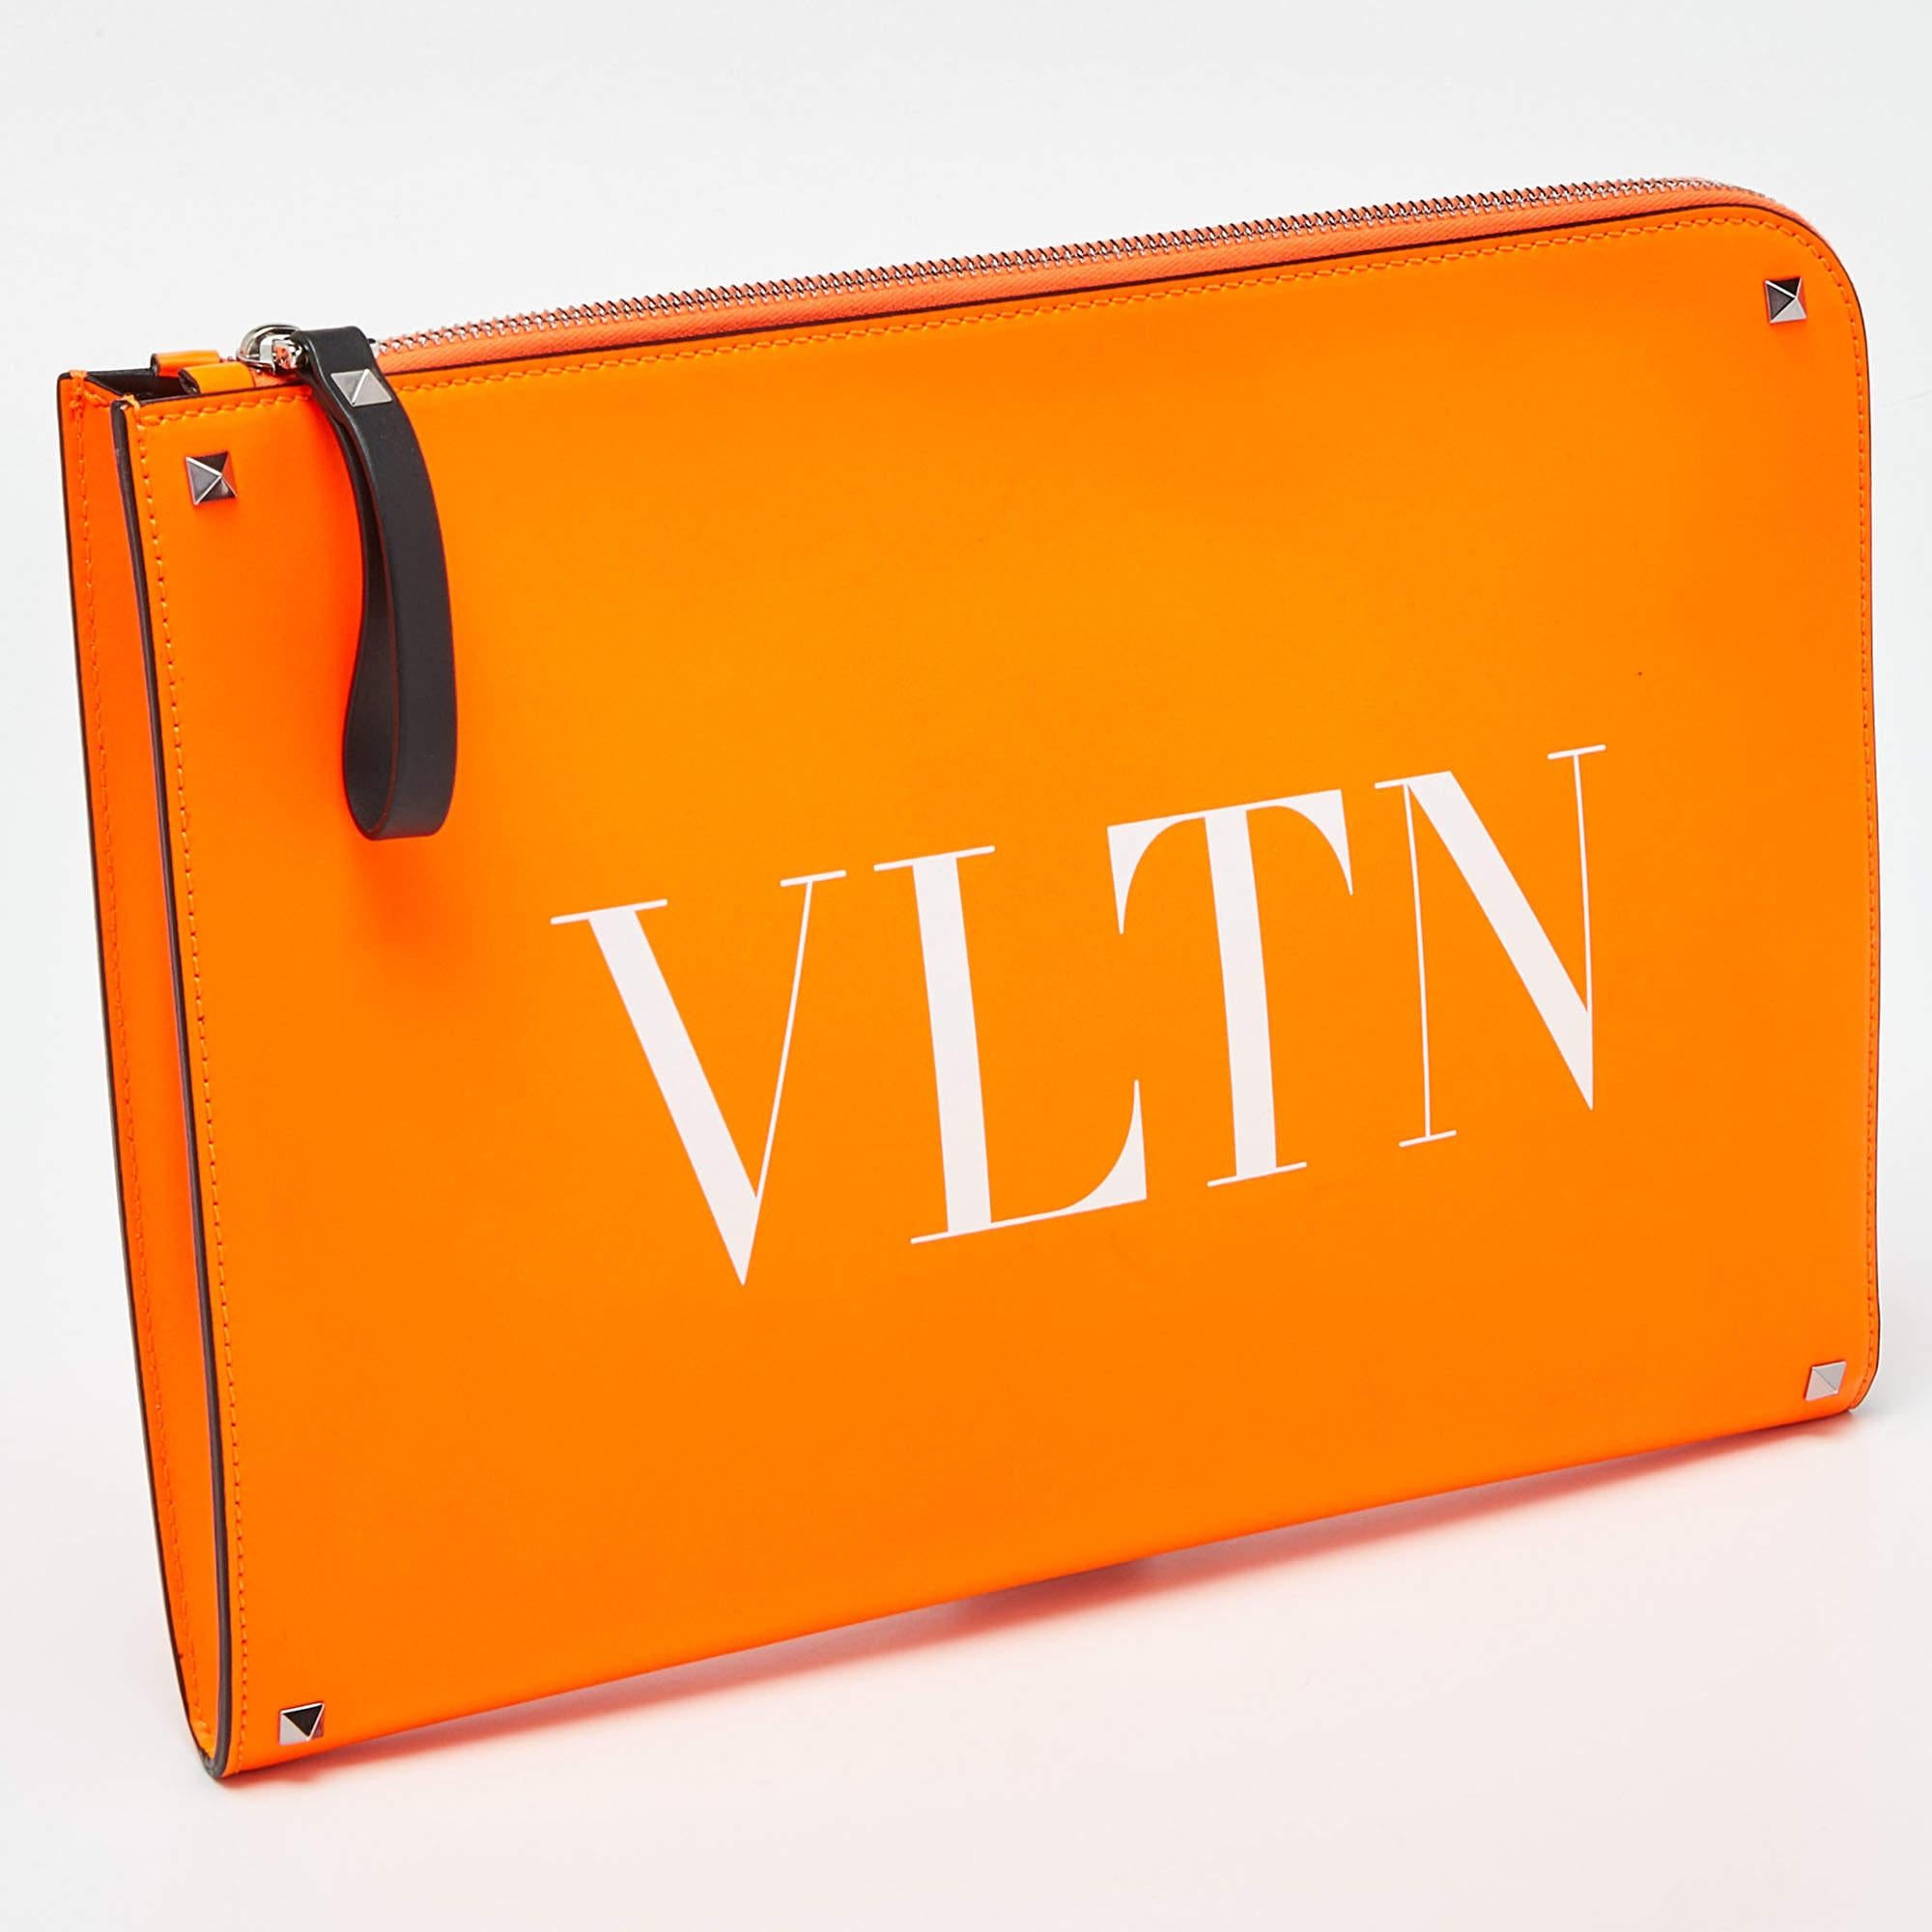 This Valentino document case is carefully crafted to offer you a luxurious accessory you will cherish. It is marked by high quality and enduring appeal. Invest in it today!

